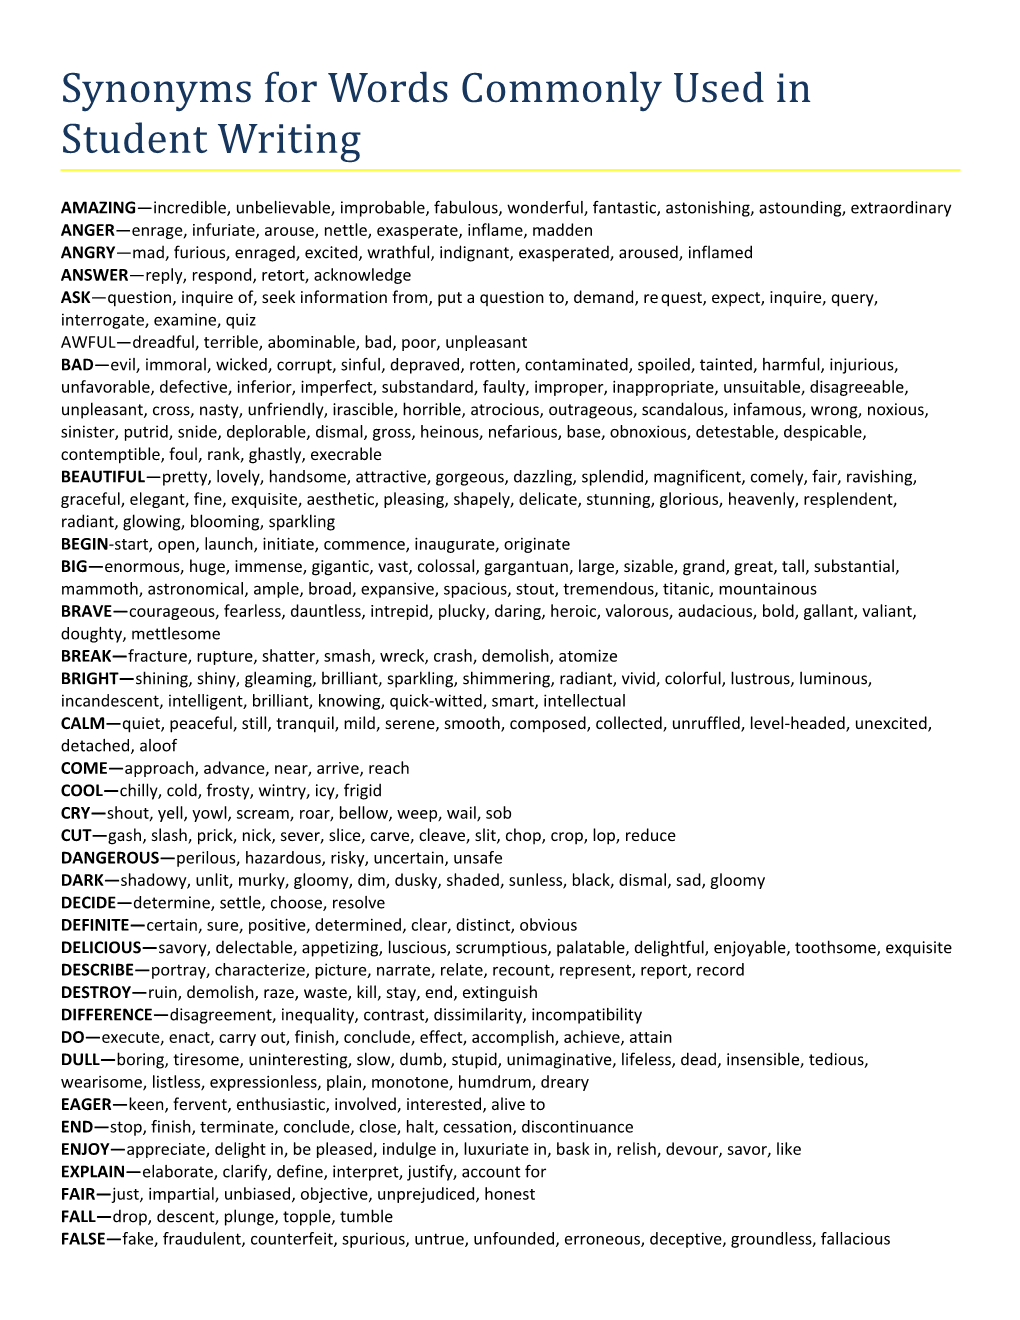 Synonyms for Words Commonly Used in Student Writing